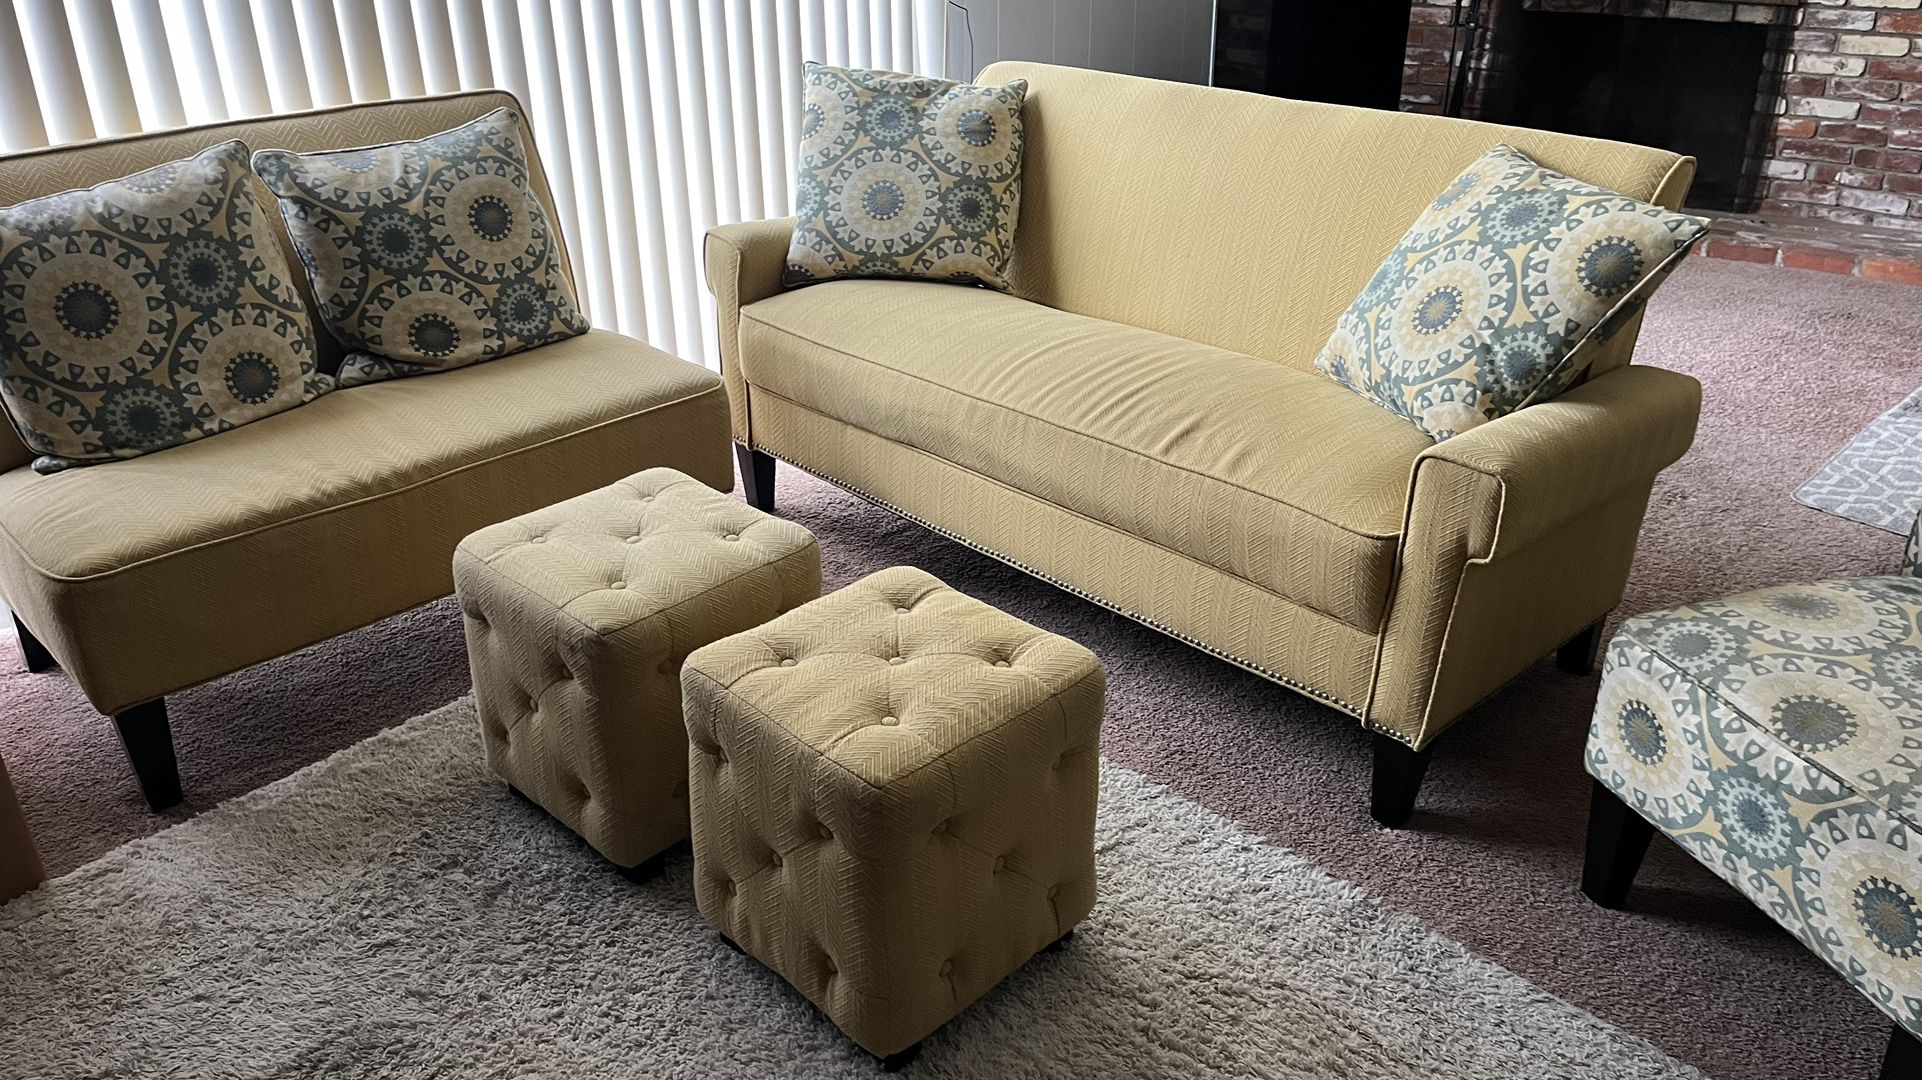 Living room Couch, Love Seat, Chair, and Ottomans. 